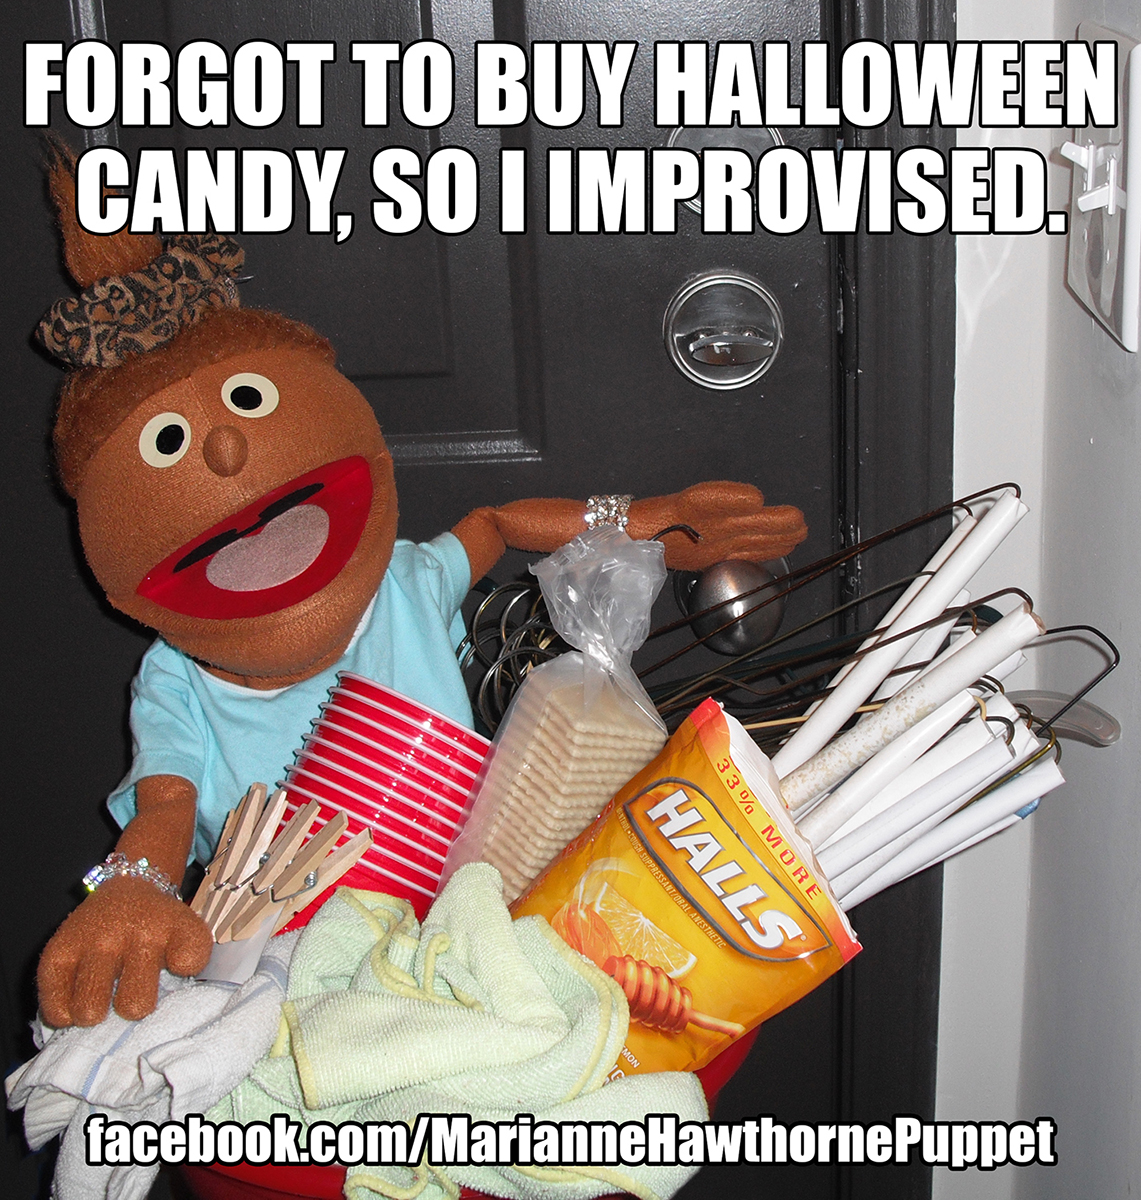 funny trick or treat memes - Forgot To Buy Halloween Candy, So I Improvised. Halls 31. More facebook.comMarianne Hawthorne Puppet